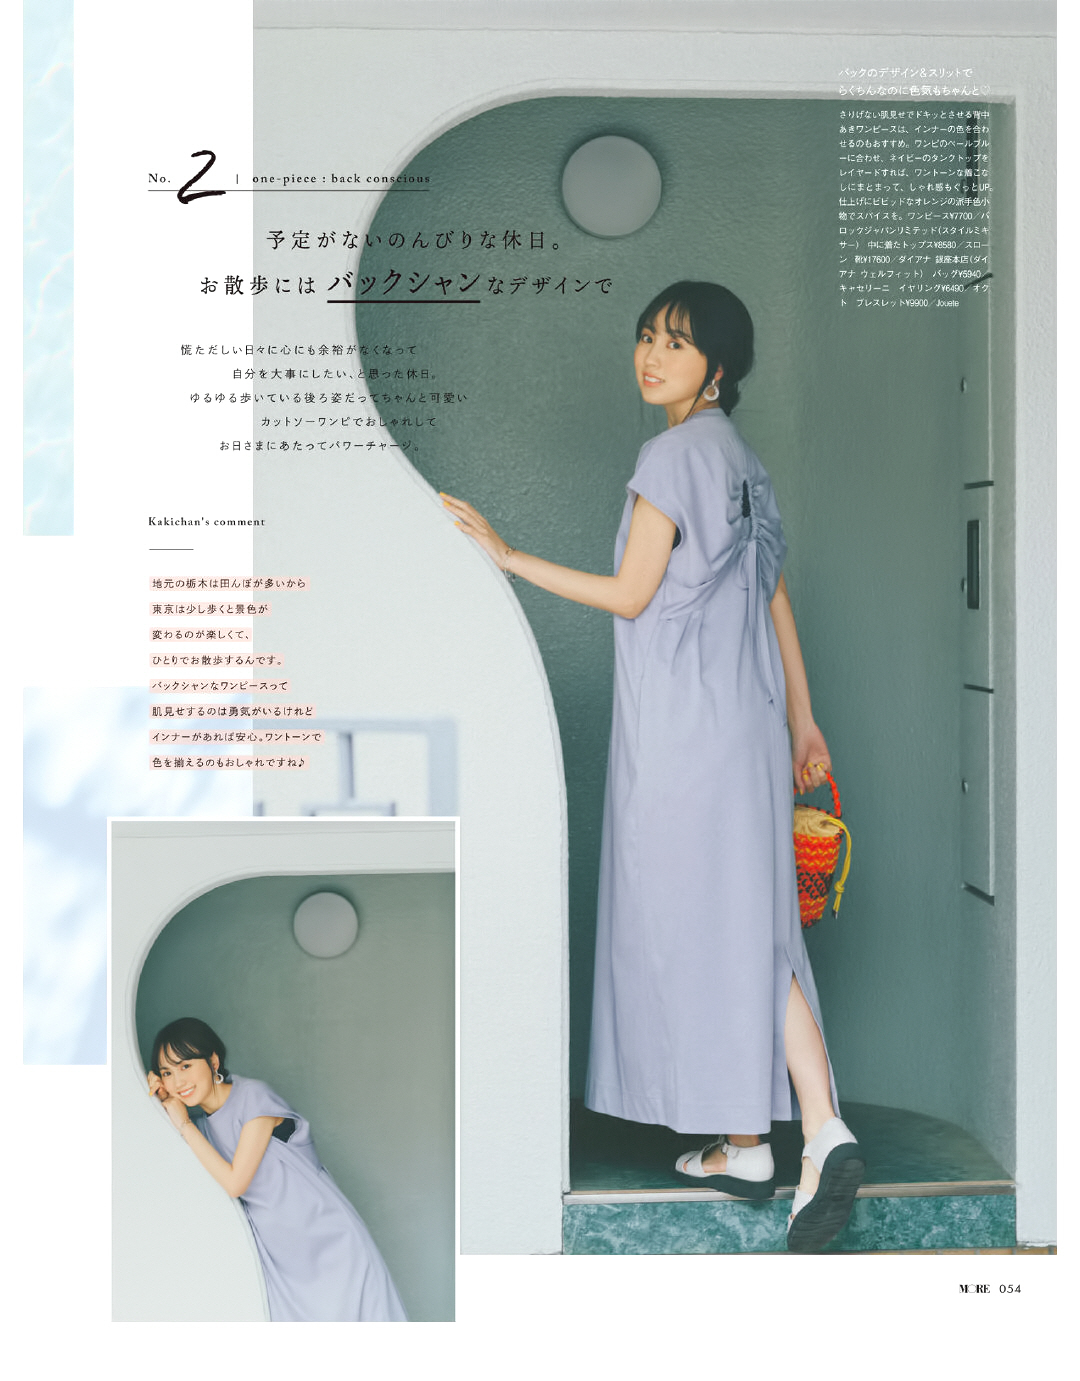 Nogizaka 46 Kaki Haruka Weekly Young Jump 2223 Merger Issue Cover MORE June 2023 Issue